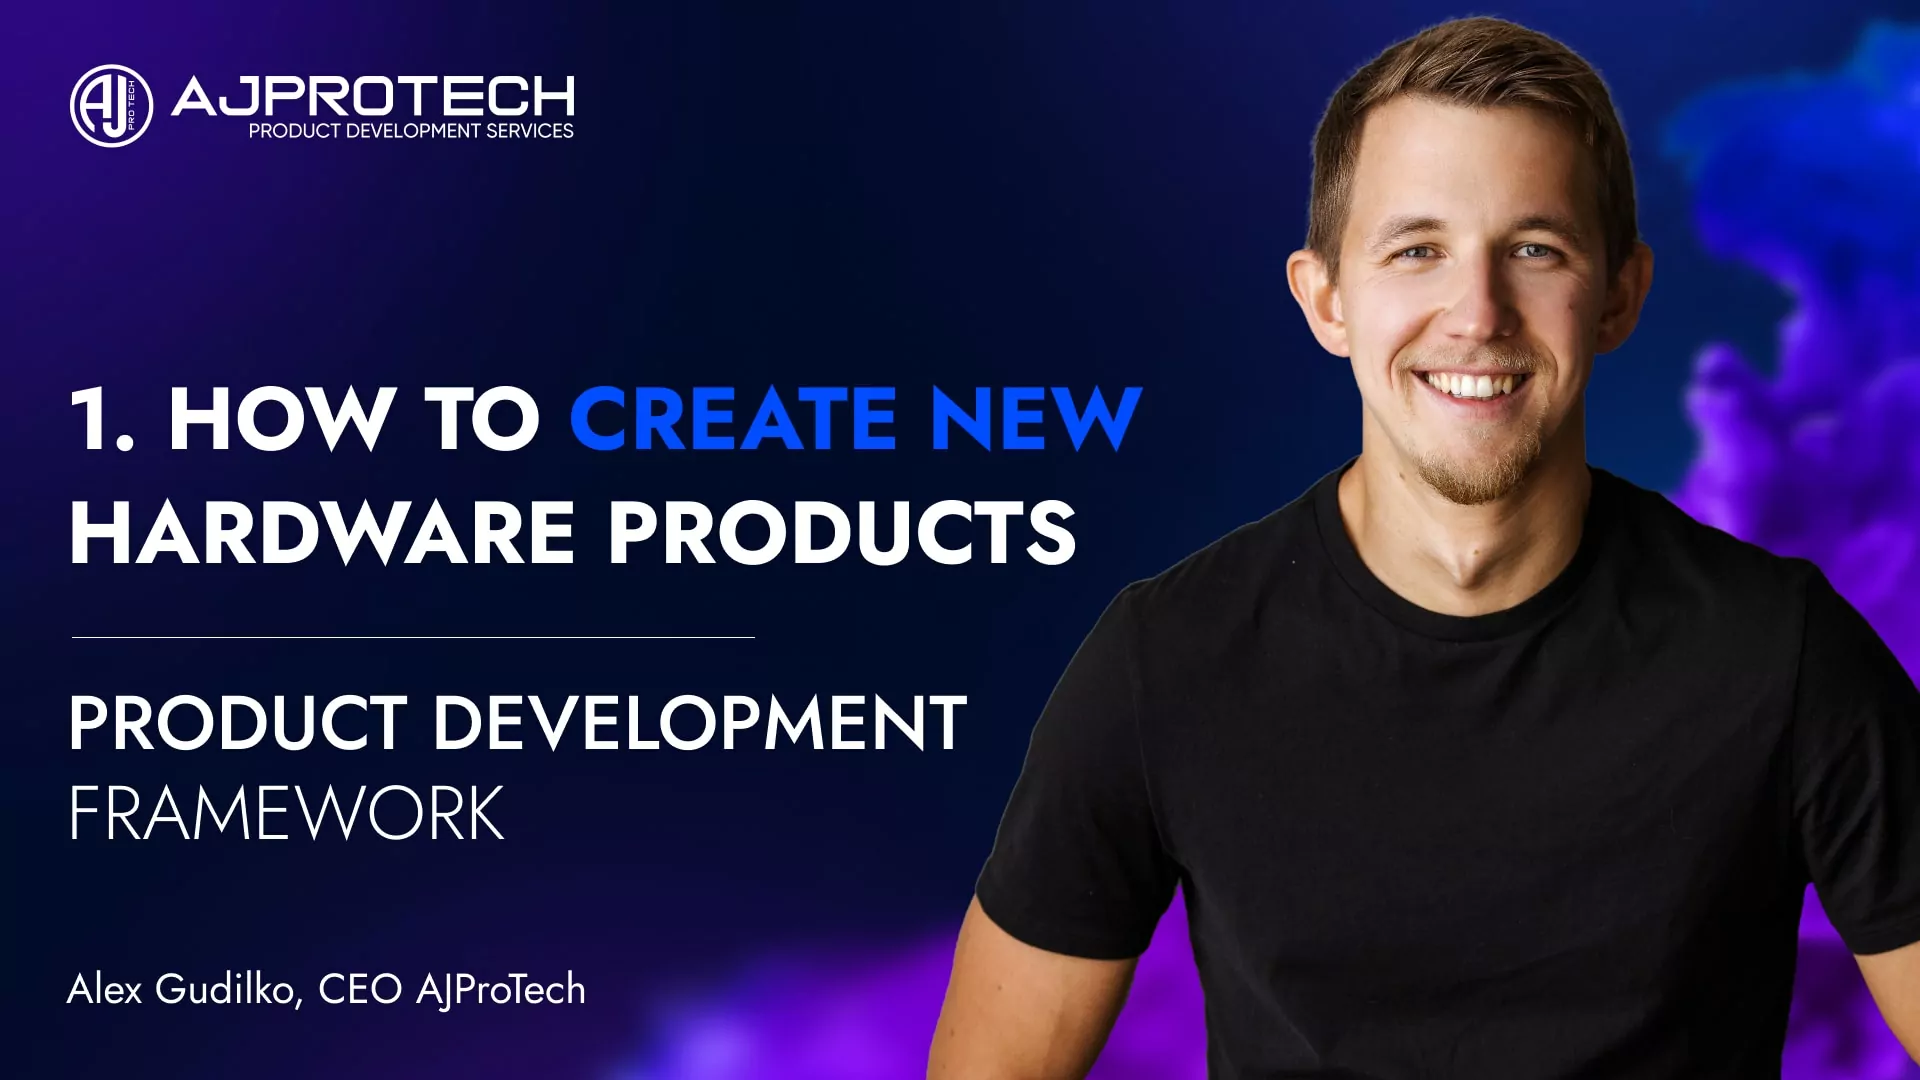 HOW TO CREATE NEW HARDWARE PRODUCTS. PRODUCT DEVELOPMENT FRAMEWORK